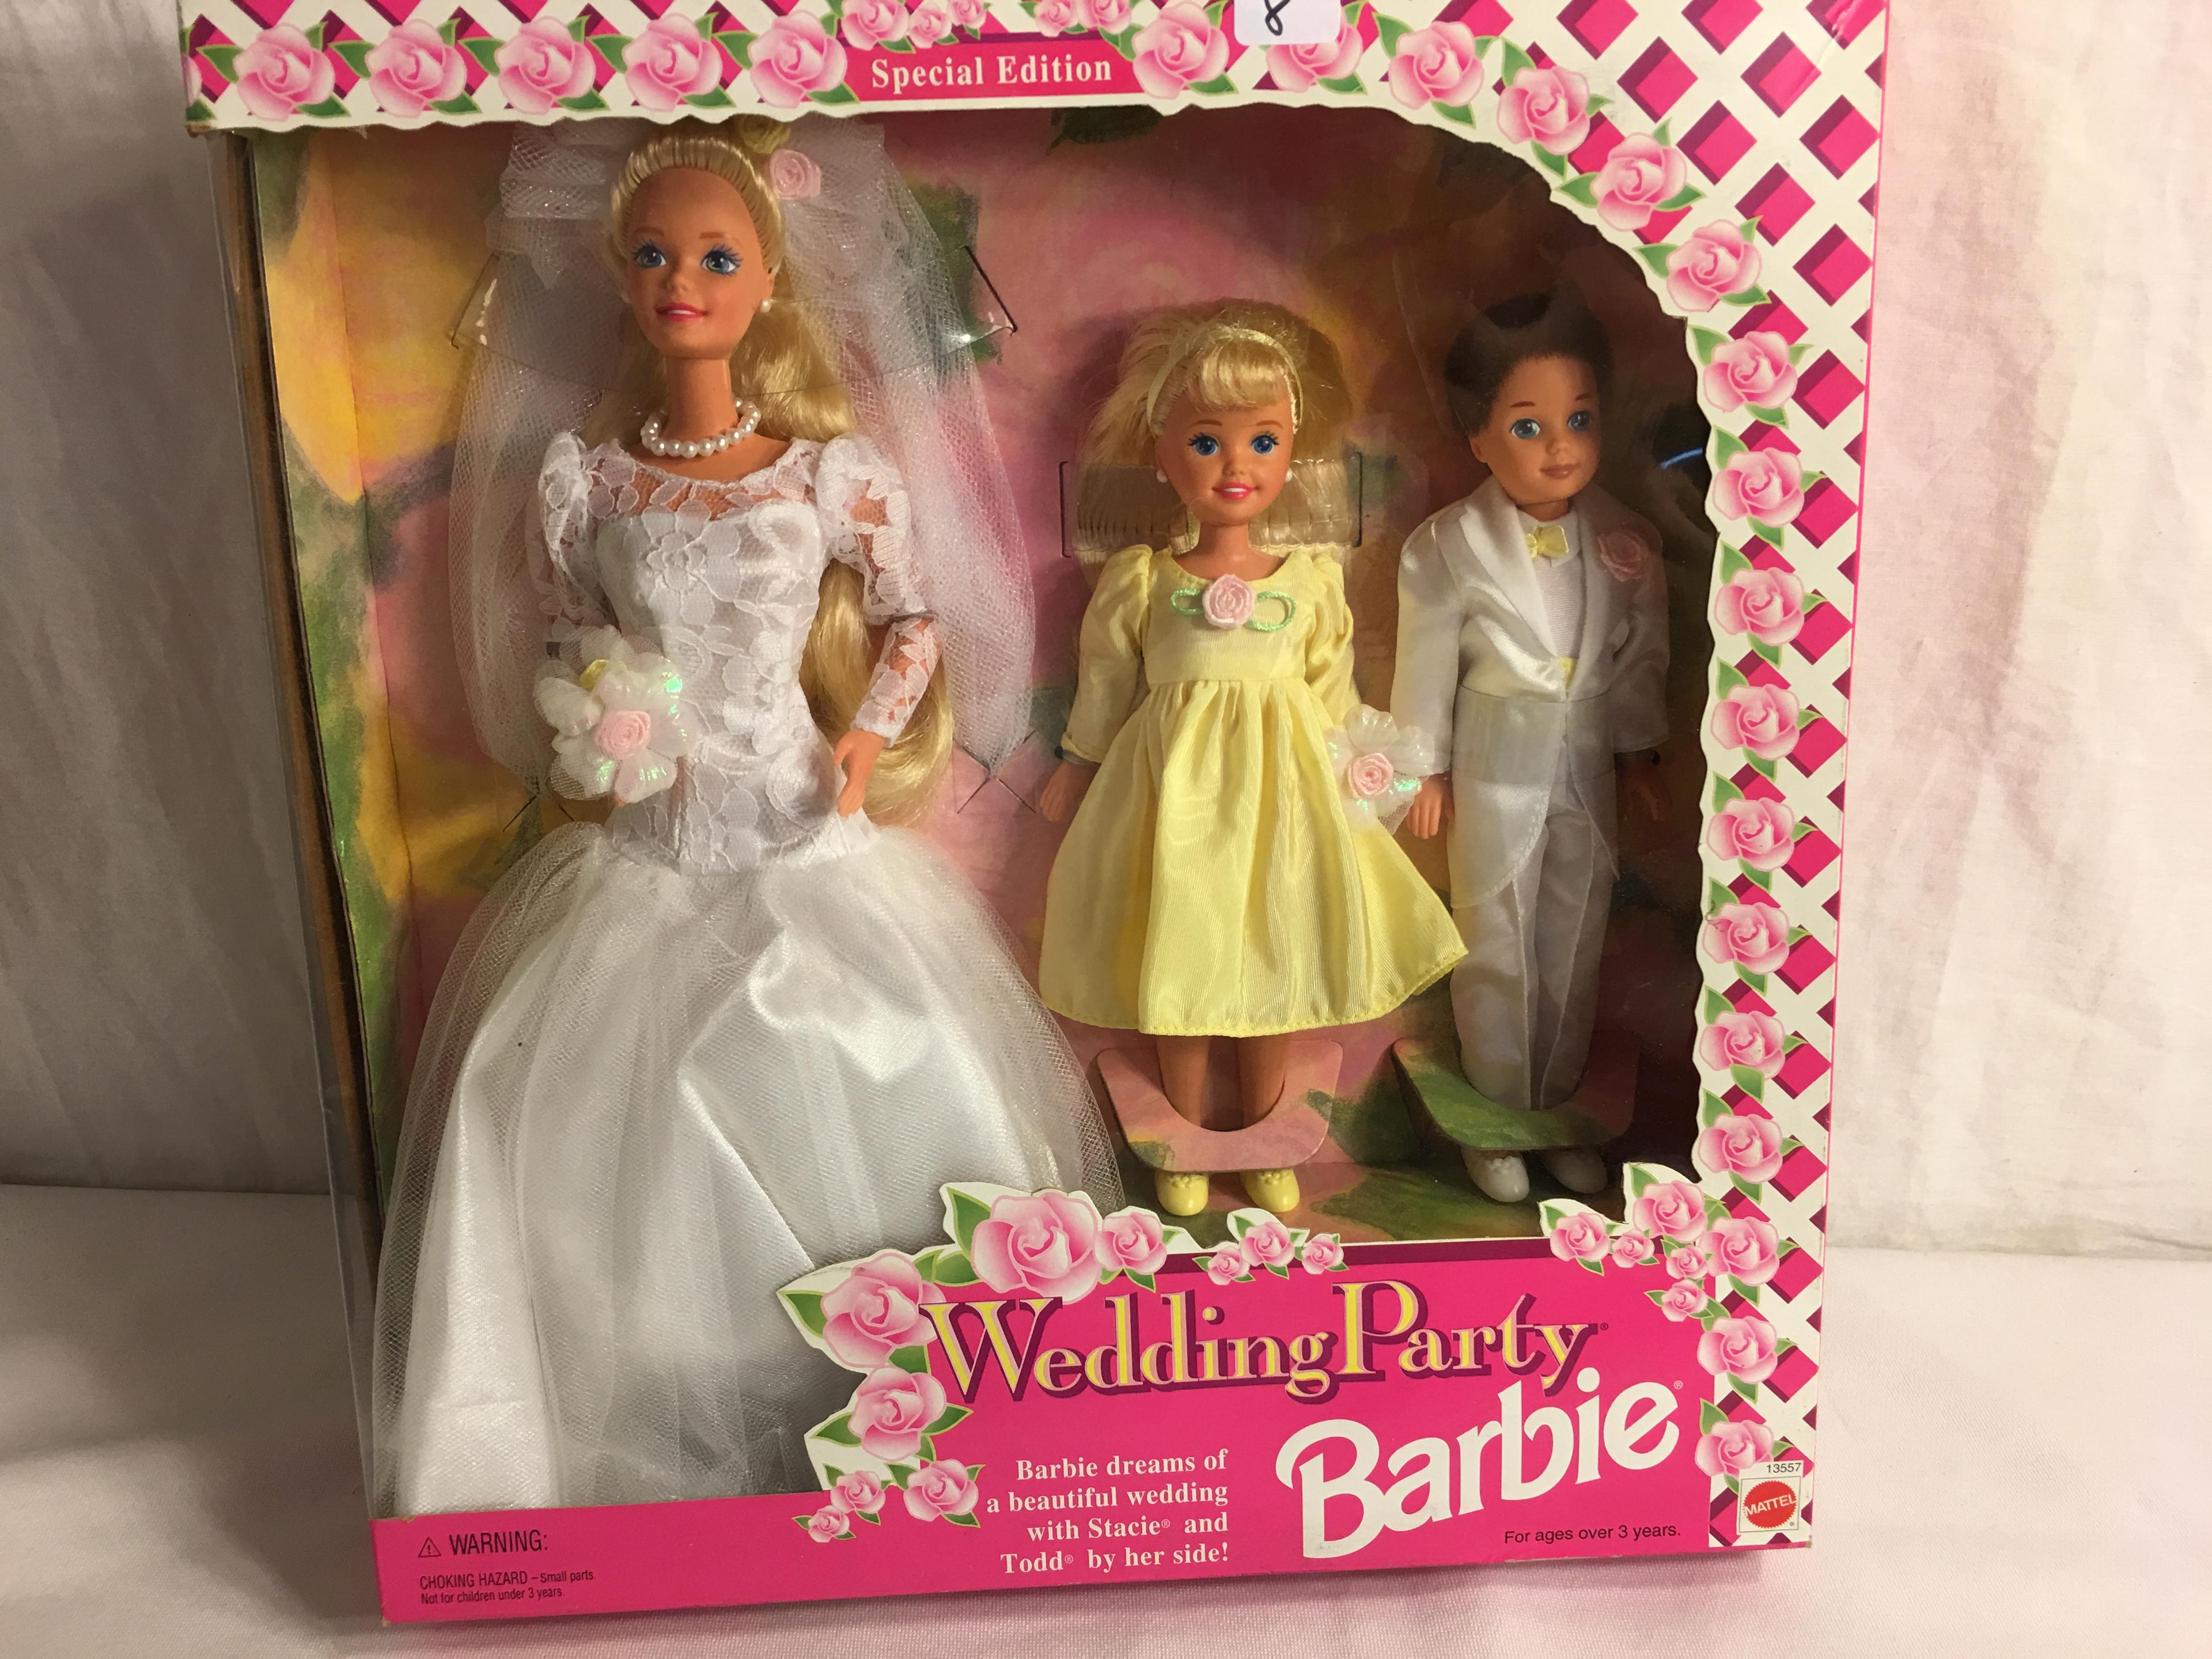 NIB Collector Special Edition Wedding Party Barbie Deluxe Set Mattel Doll 13"Tall Box Size